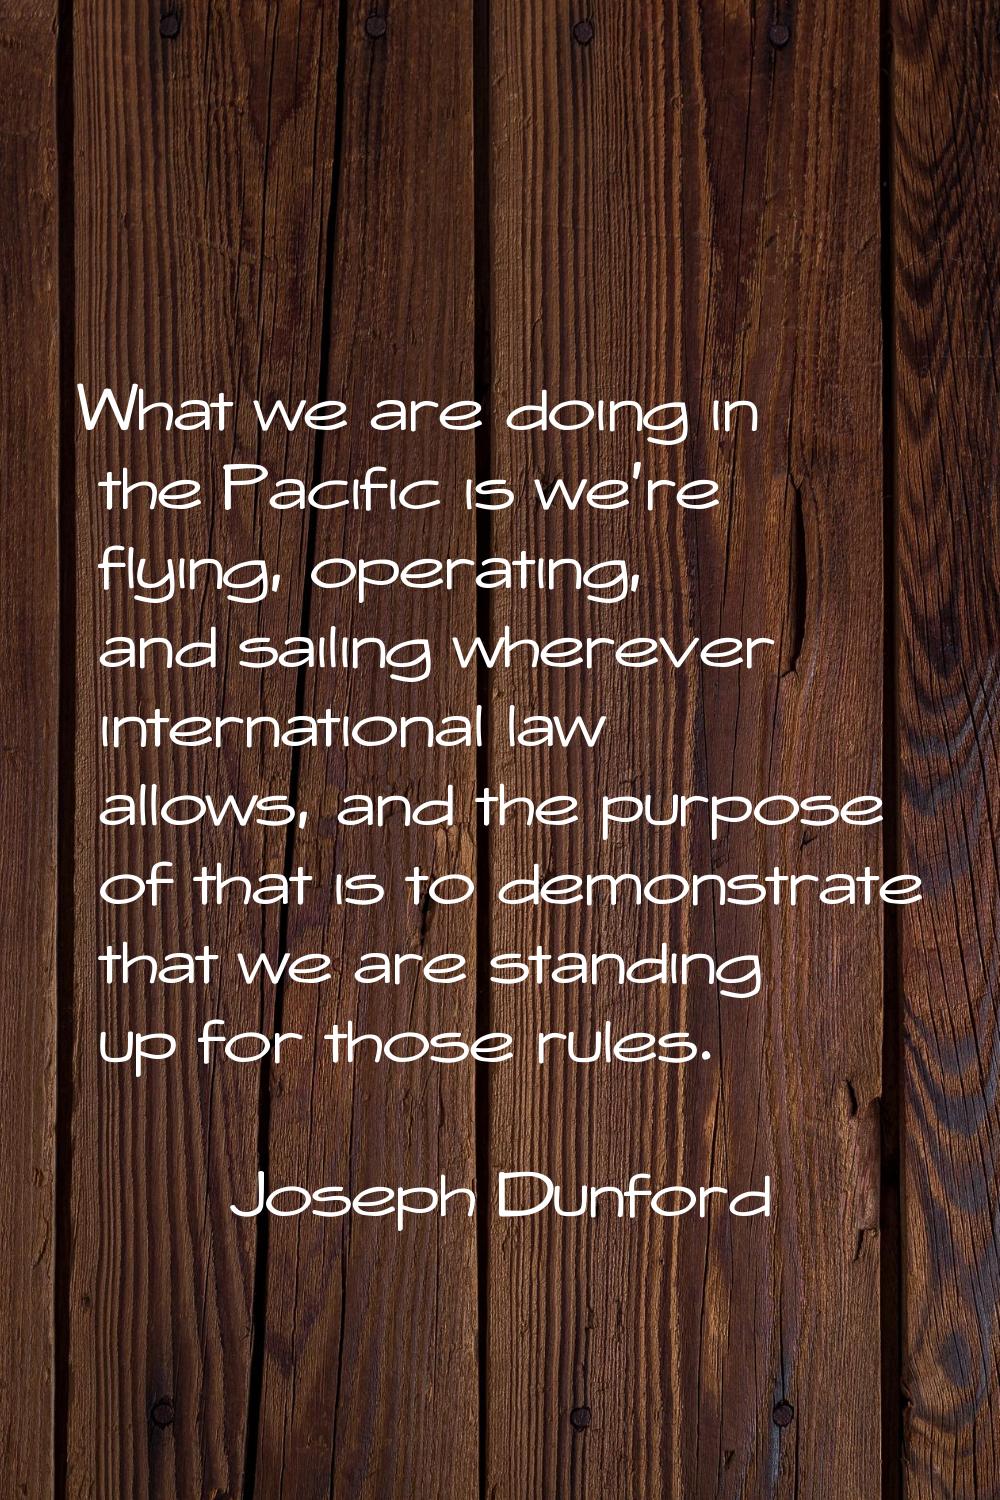 What we are doing in the Pacific is we're flying, operating, and sailing wherever international law